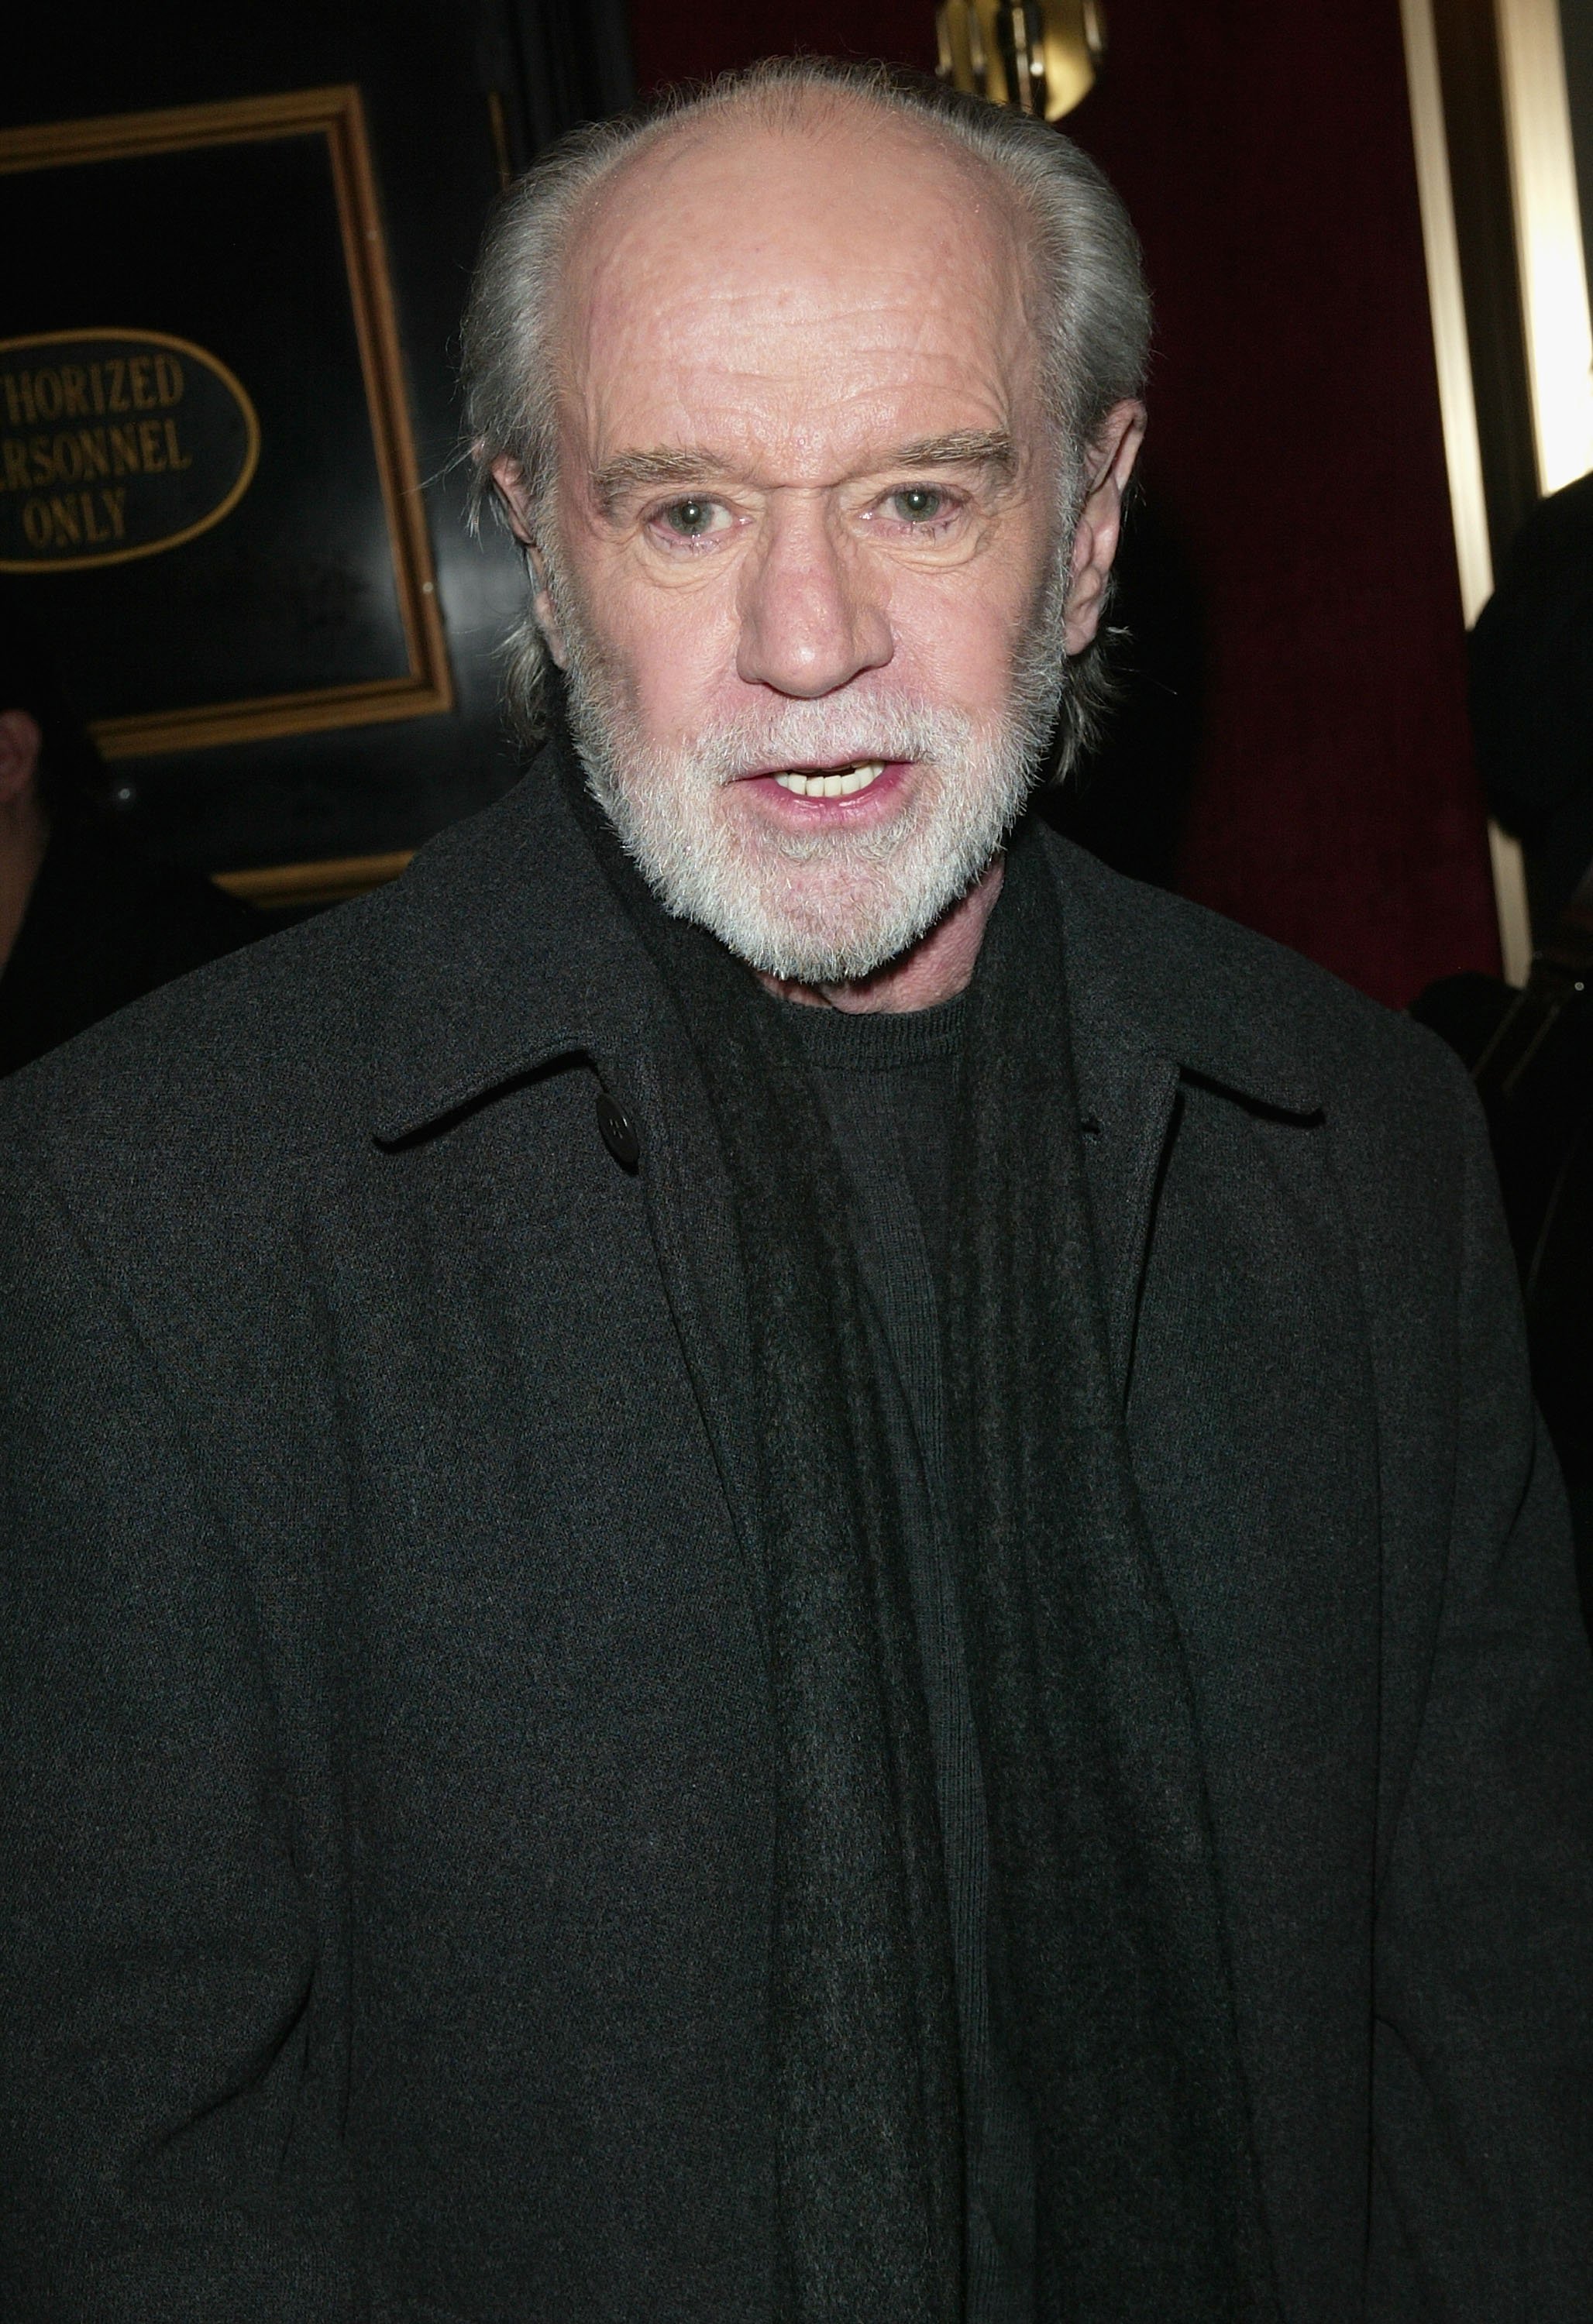 Comedian George Carlin attends the "jersey girl" the film premiered March 9, 2004 at the Ziegfeld Theater, New York.  |  Source: Getty Images